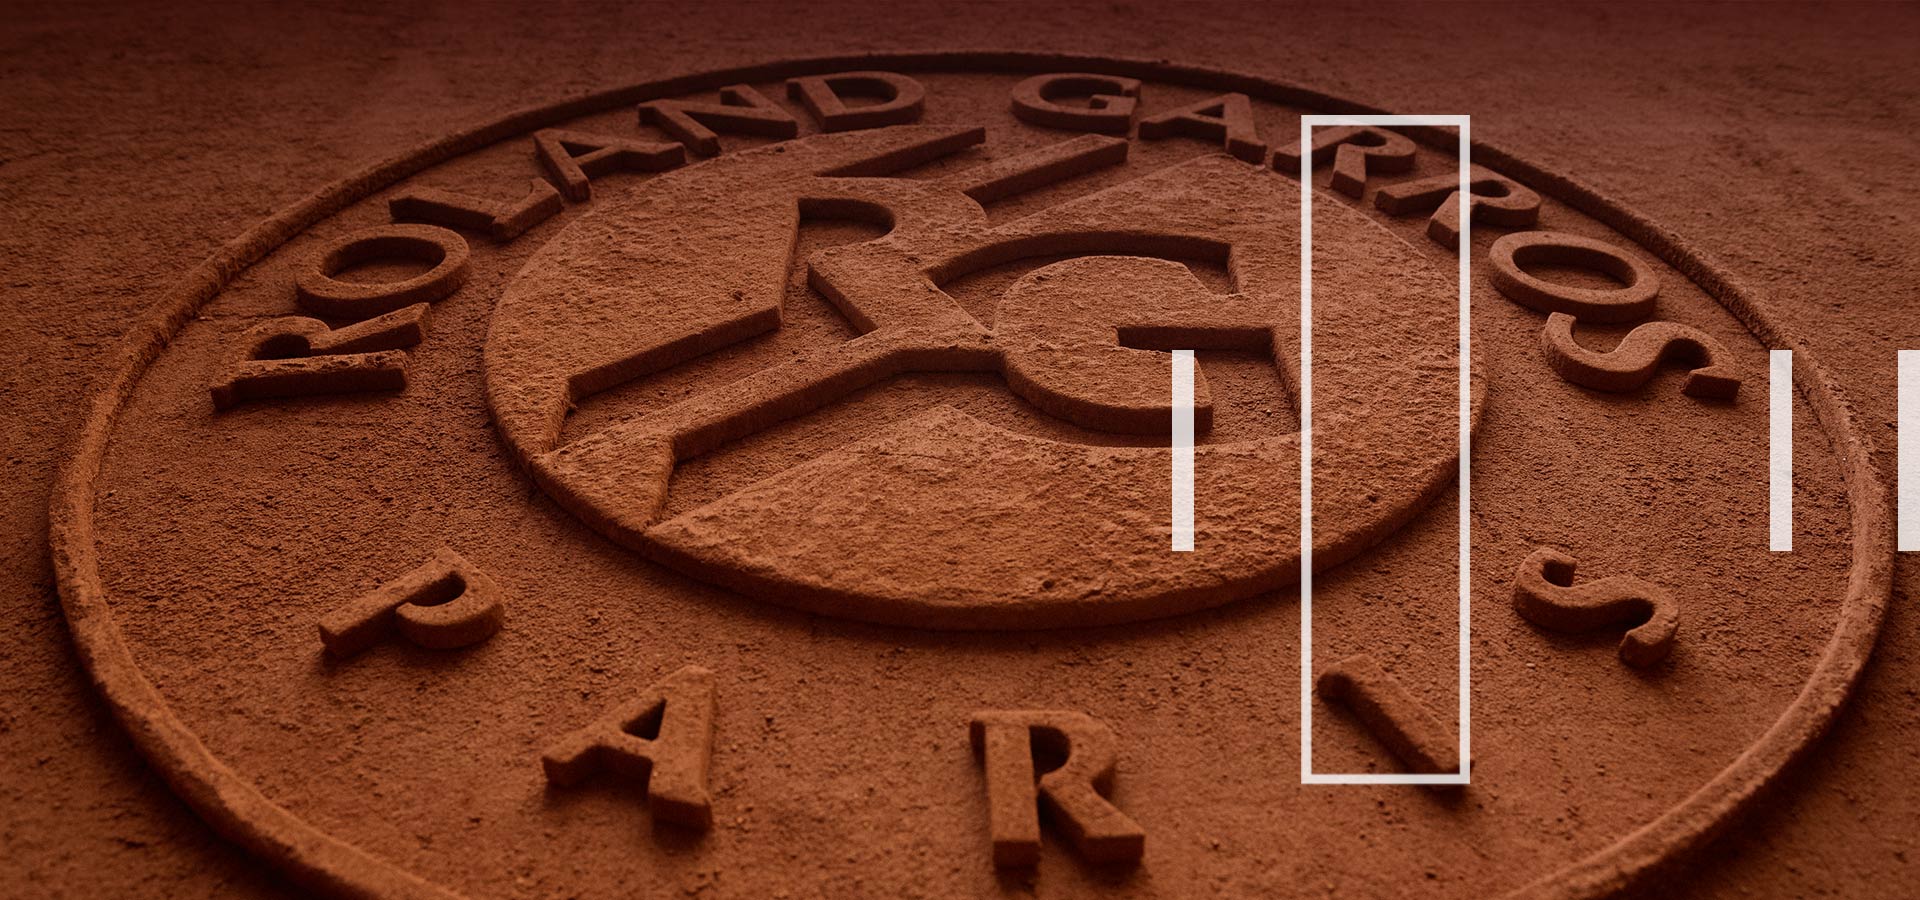 Roland-Garros and Infosys Extend Digital Innovation Partnership For Another Five Years, until 2026